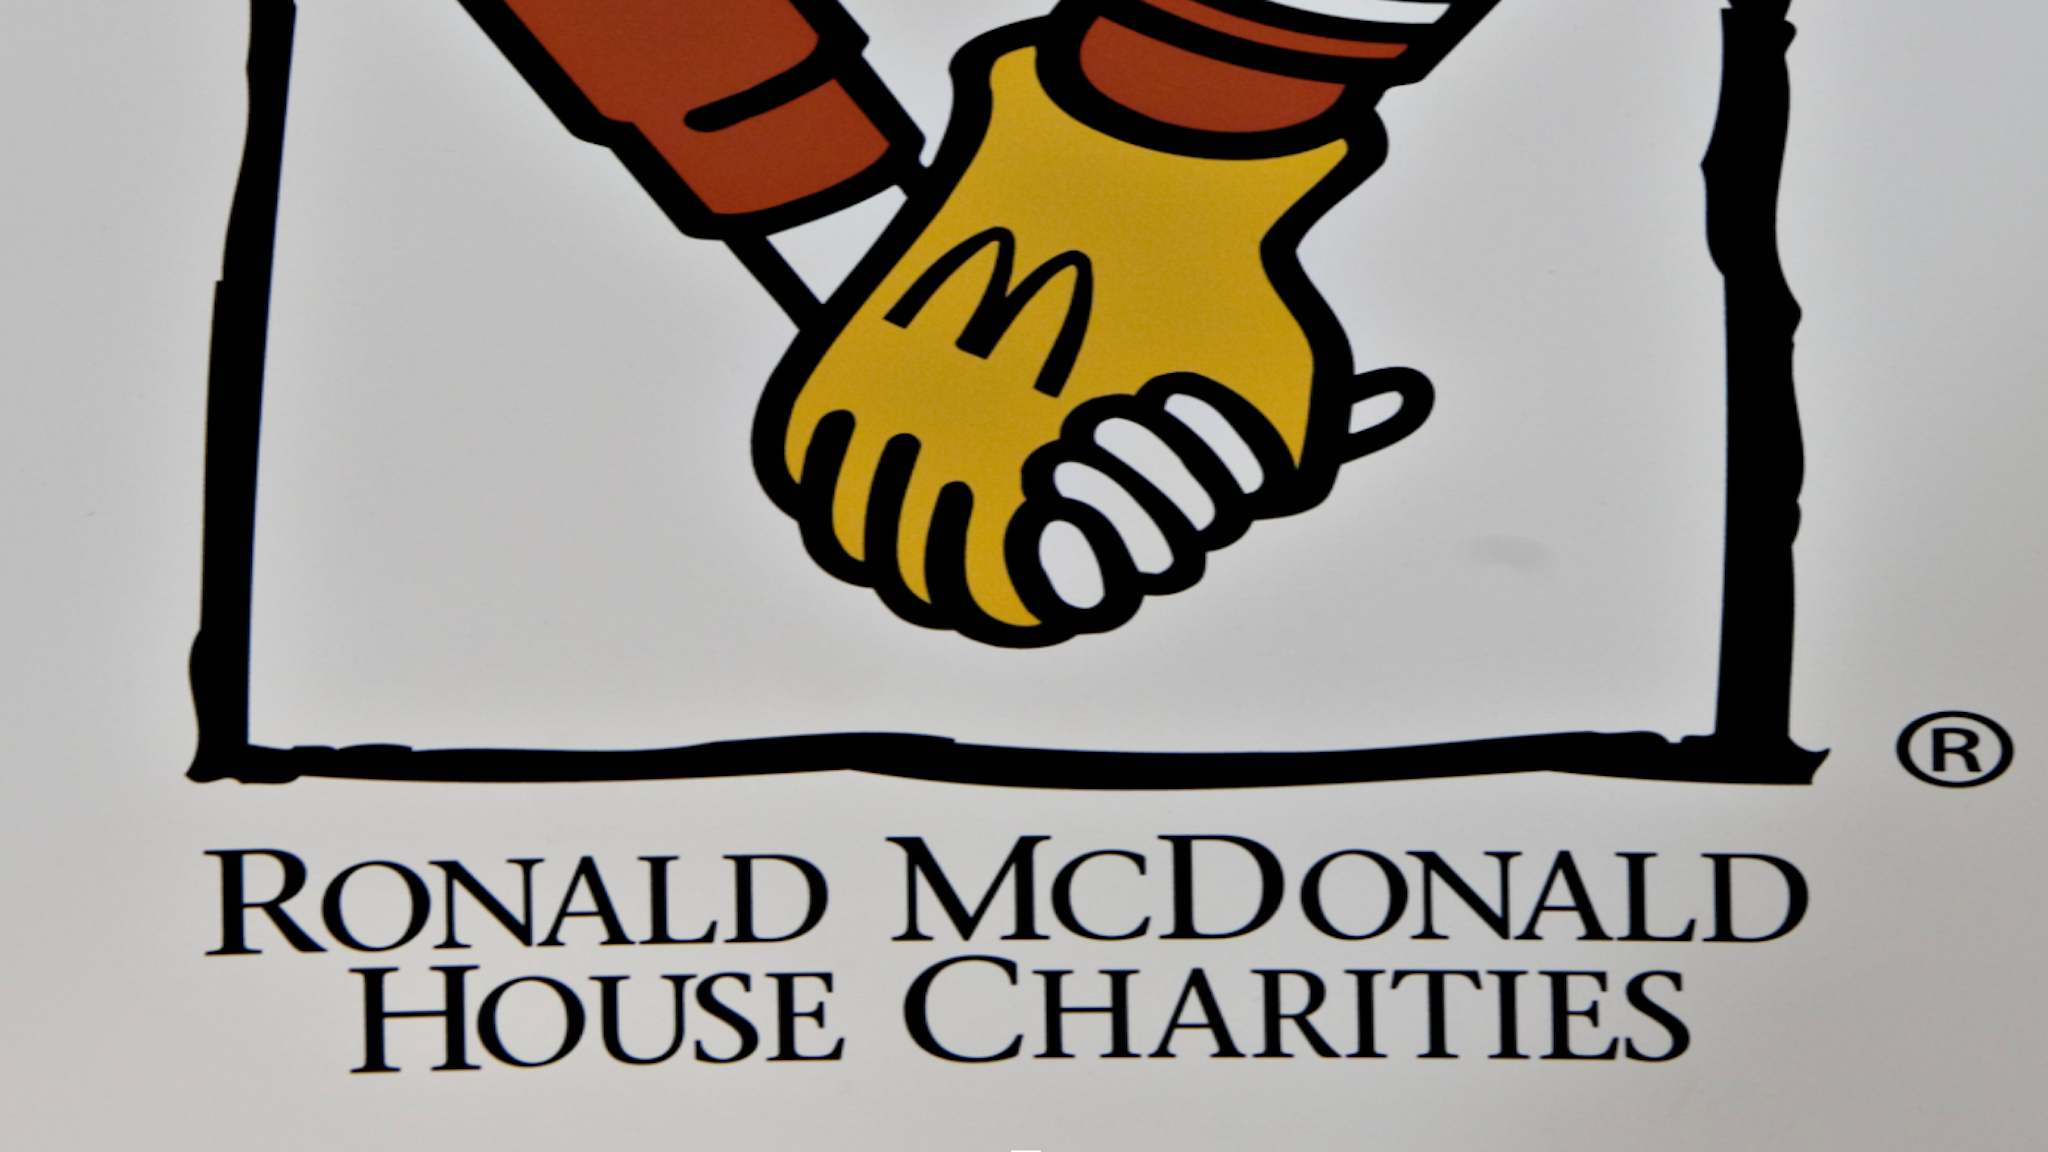 A Ronald McDonald House Charities logo sits on display on the sidelines of the Berkshire Hathaway annual meeting in Omaha, Nebraska, U.S., on Saturday, May 1, 2010. Ronald McDonald house exists to "create, find and support programs that directly improve the health and well being of children," according to its website.